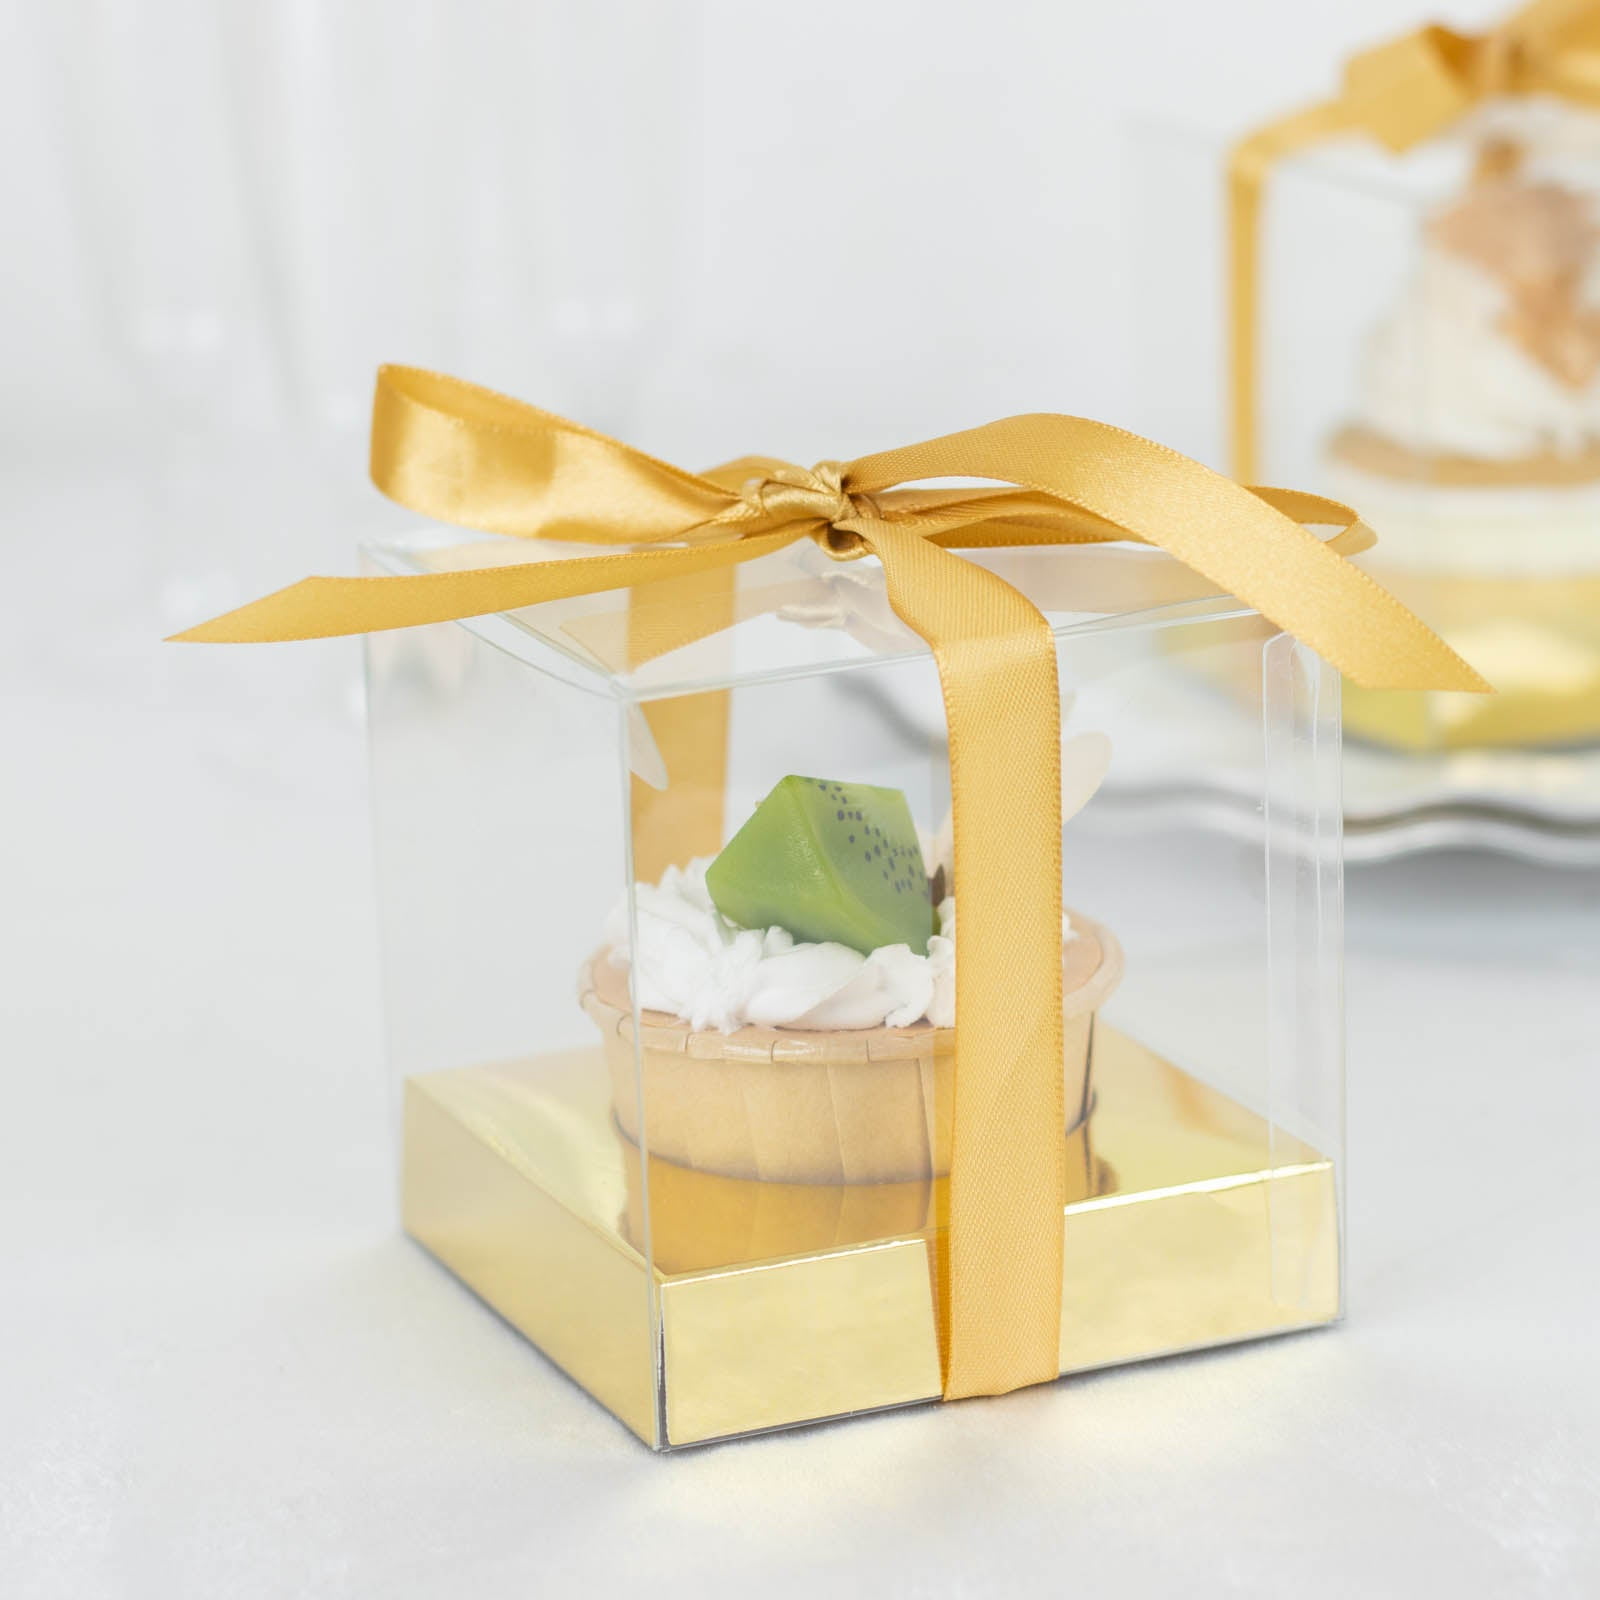 12 CLEAR 3 Square Bow Top Design Favor Boxes GIFT HOLDERS Party  Decorations